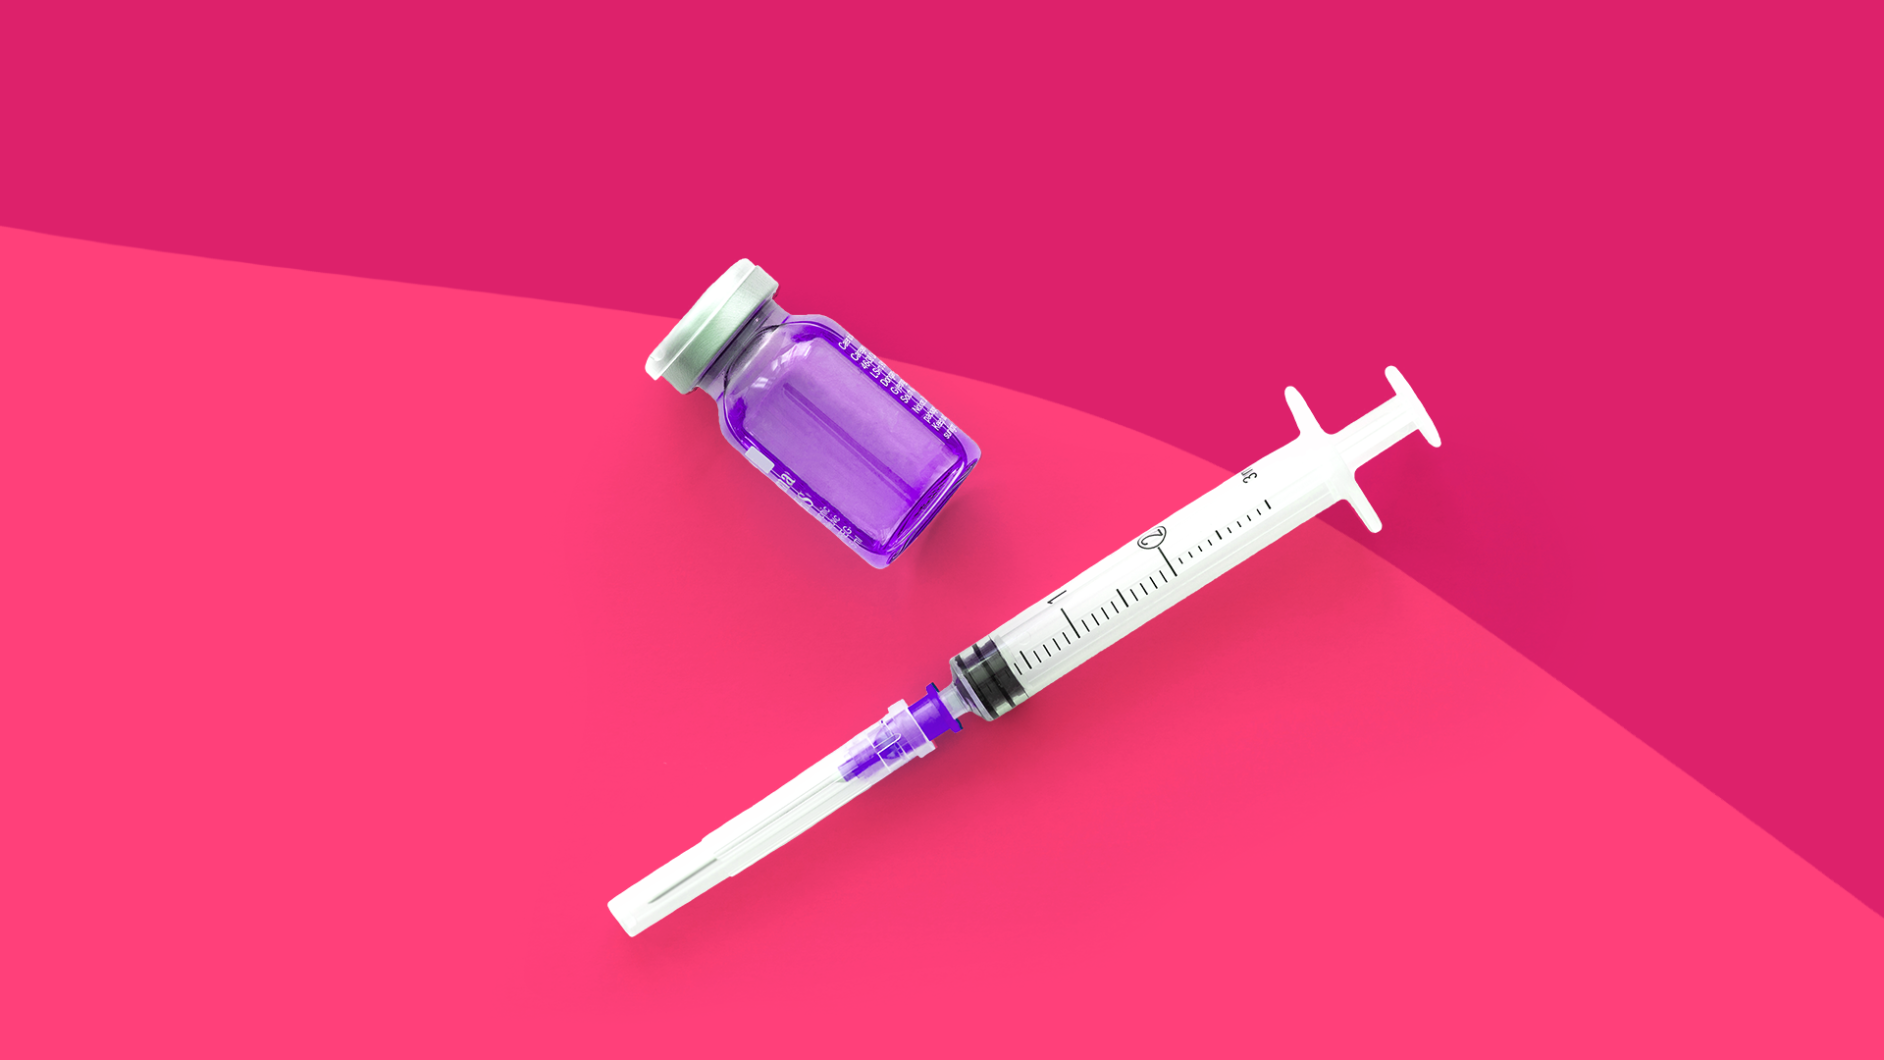 An image of the Bexsero vaccine